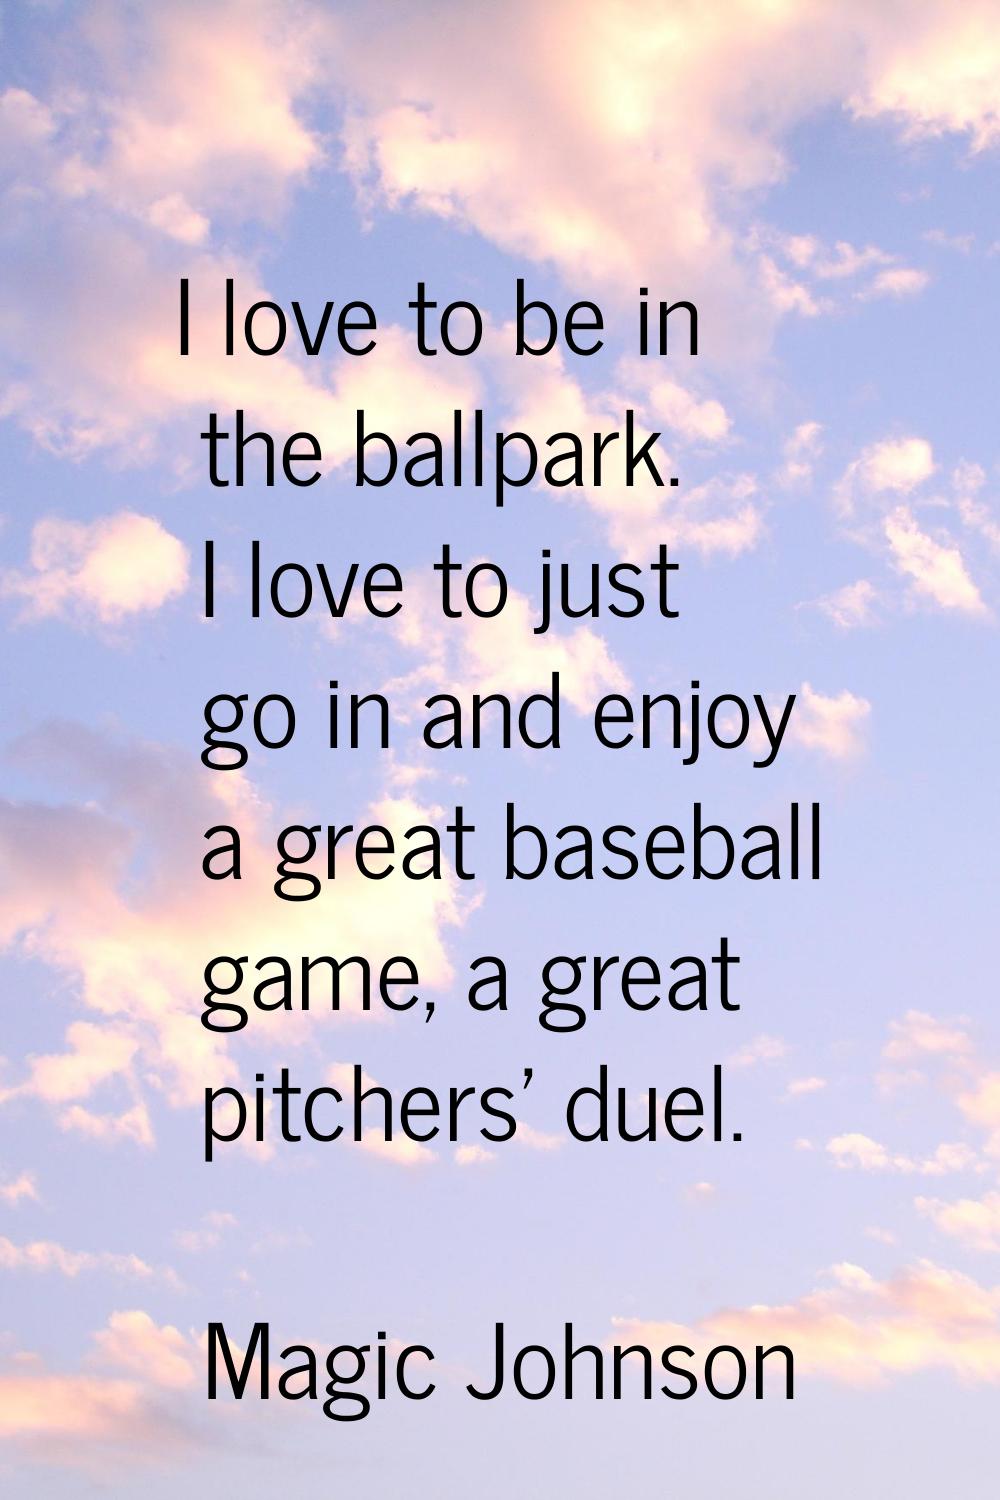 I love to be in the ballpark. I love to just go in and enjoy a great baseball game, a great pitcher